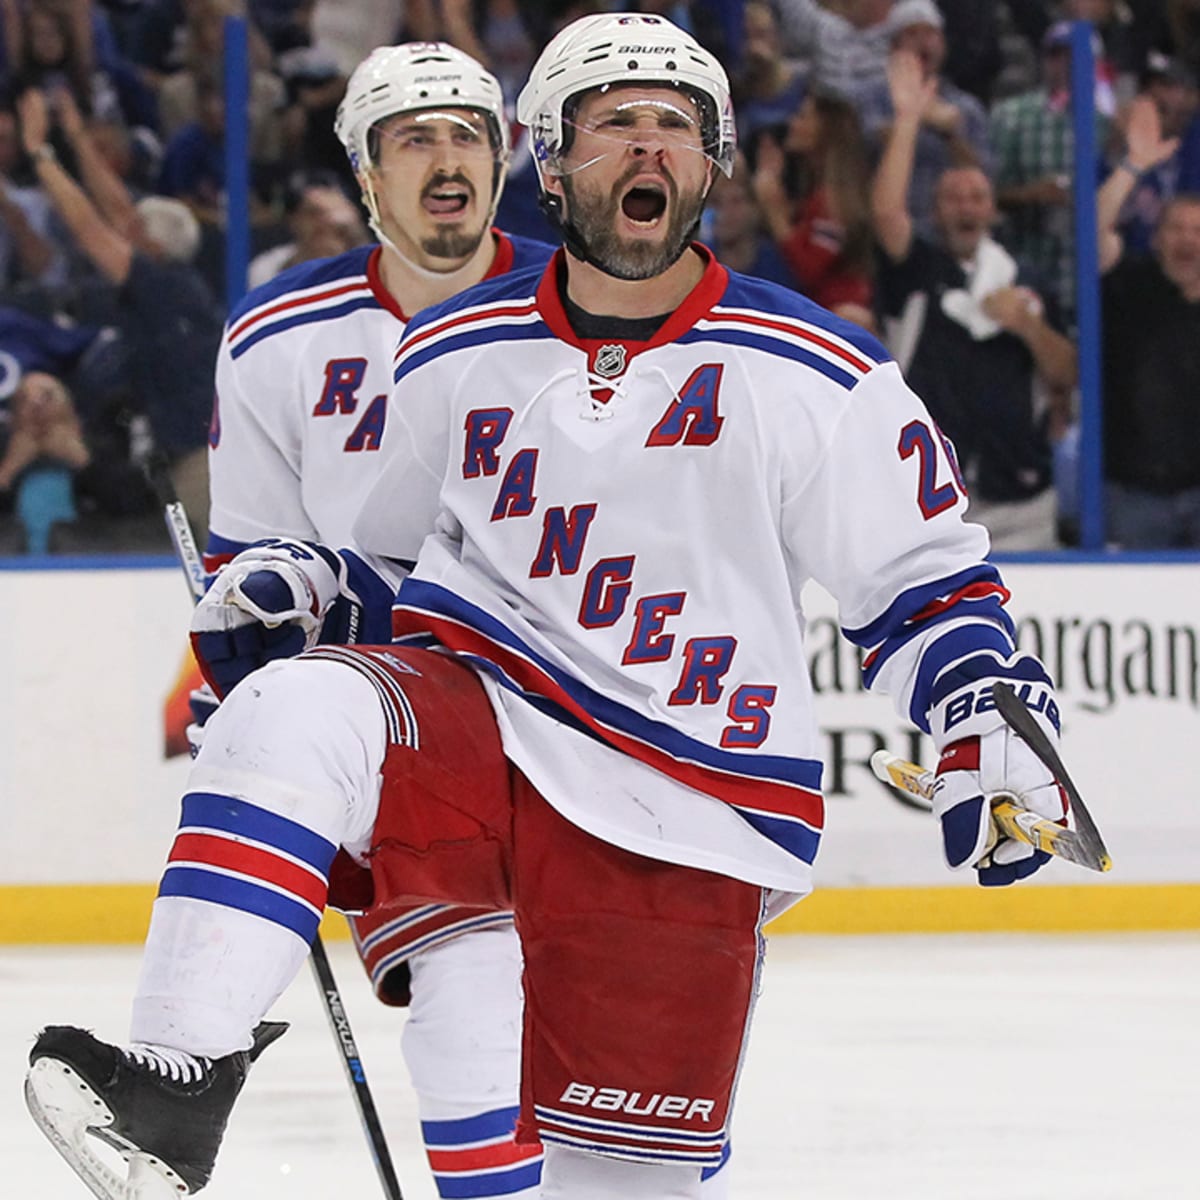 Martin St. Louis' Five greatest moments as a New York Ranger